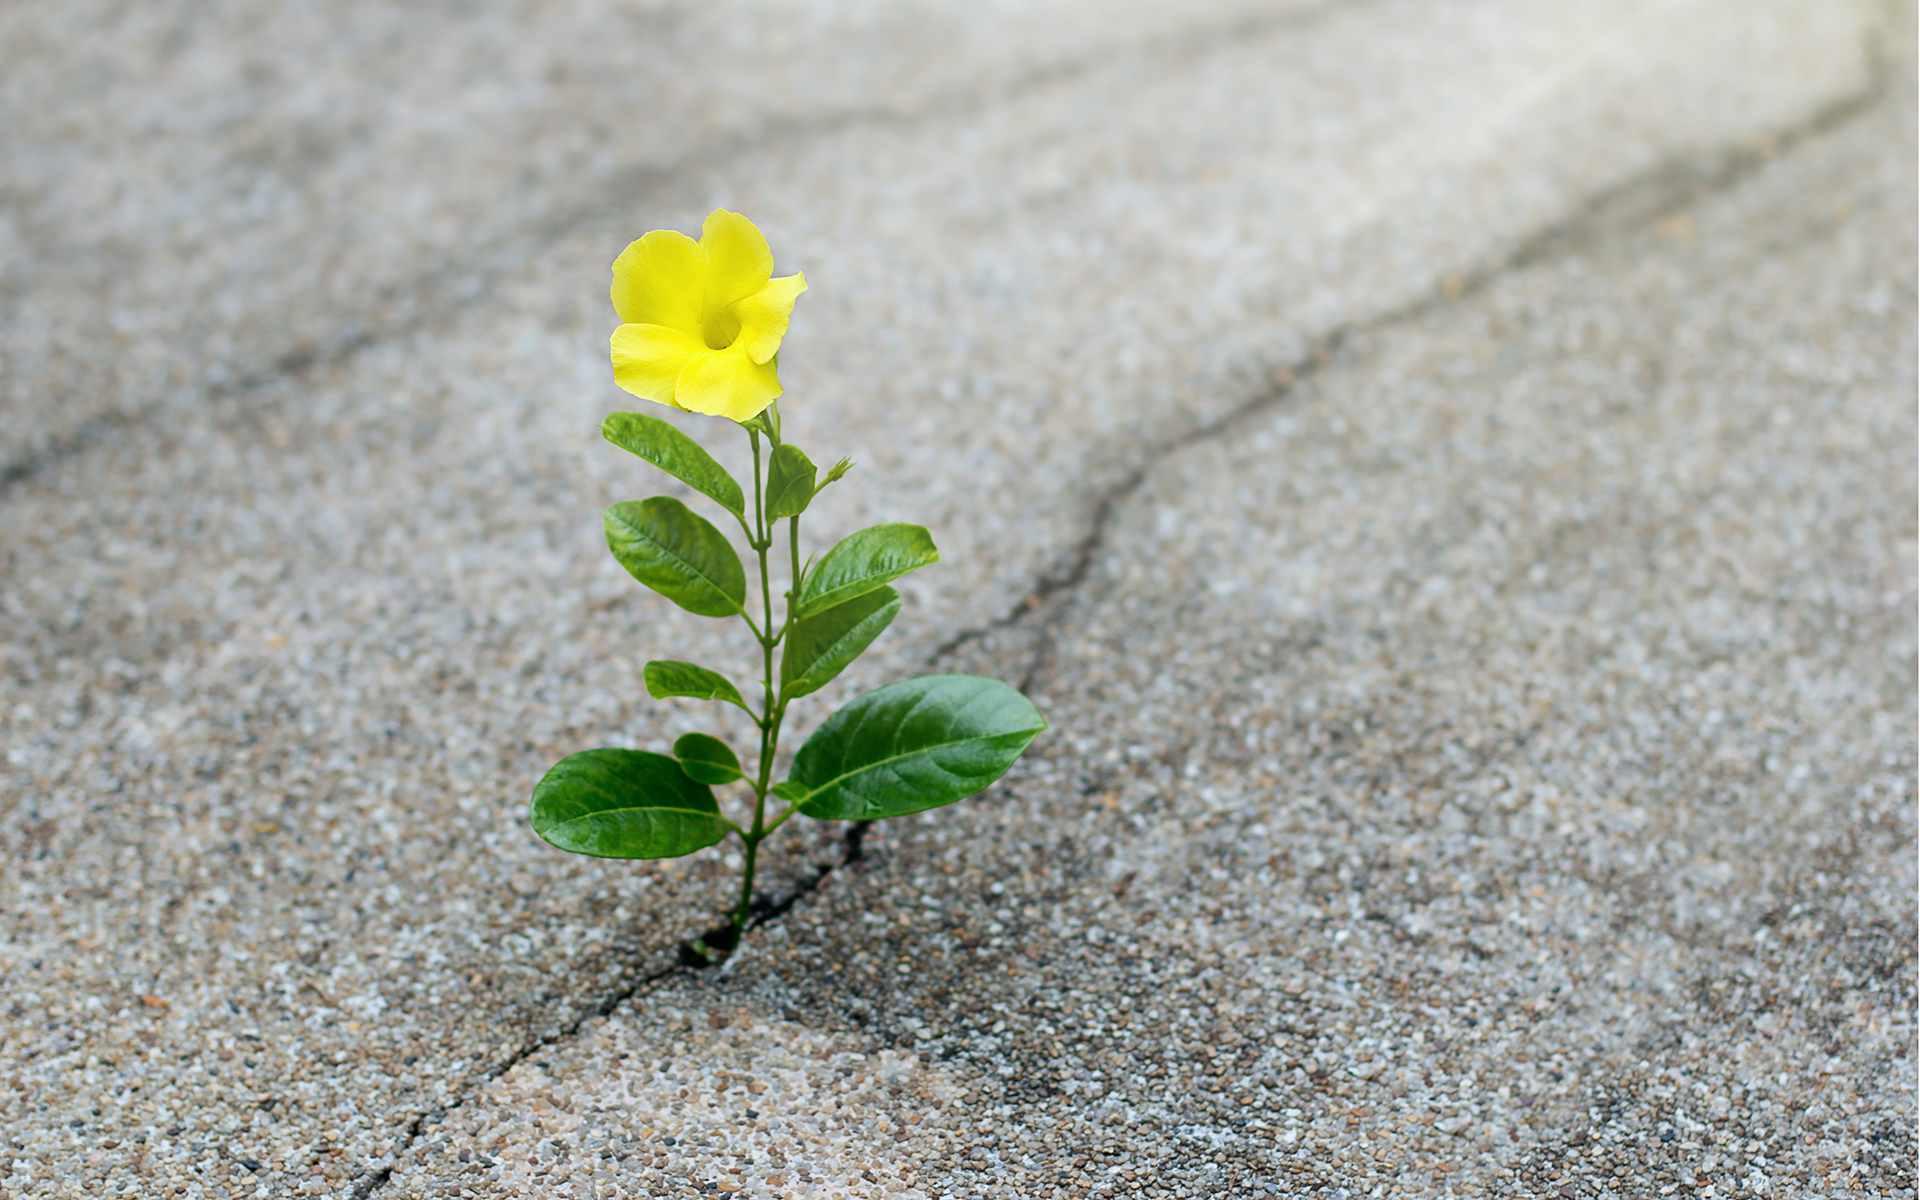 Image of a yellow flower growing up through a crack in pavement.